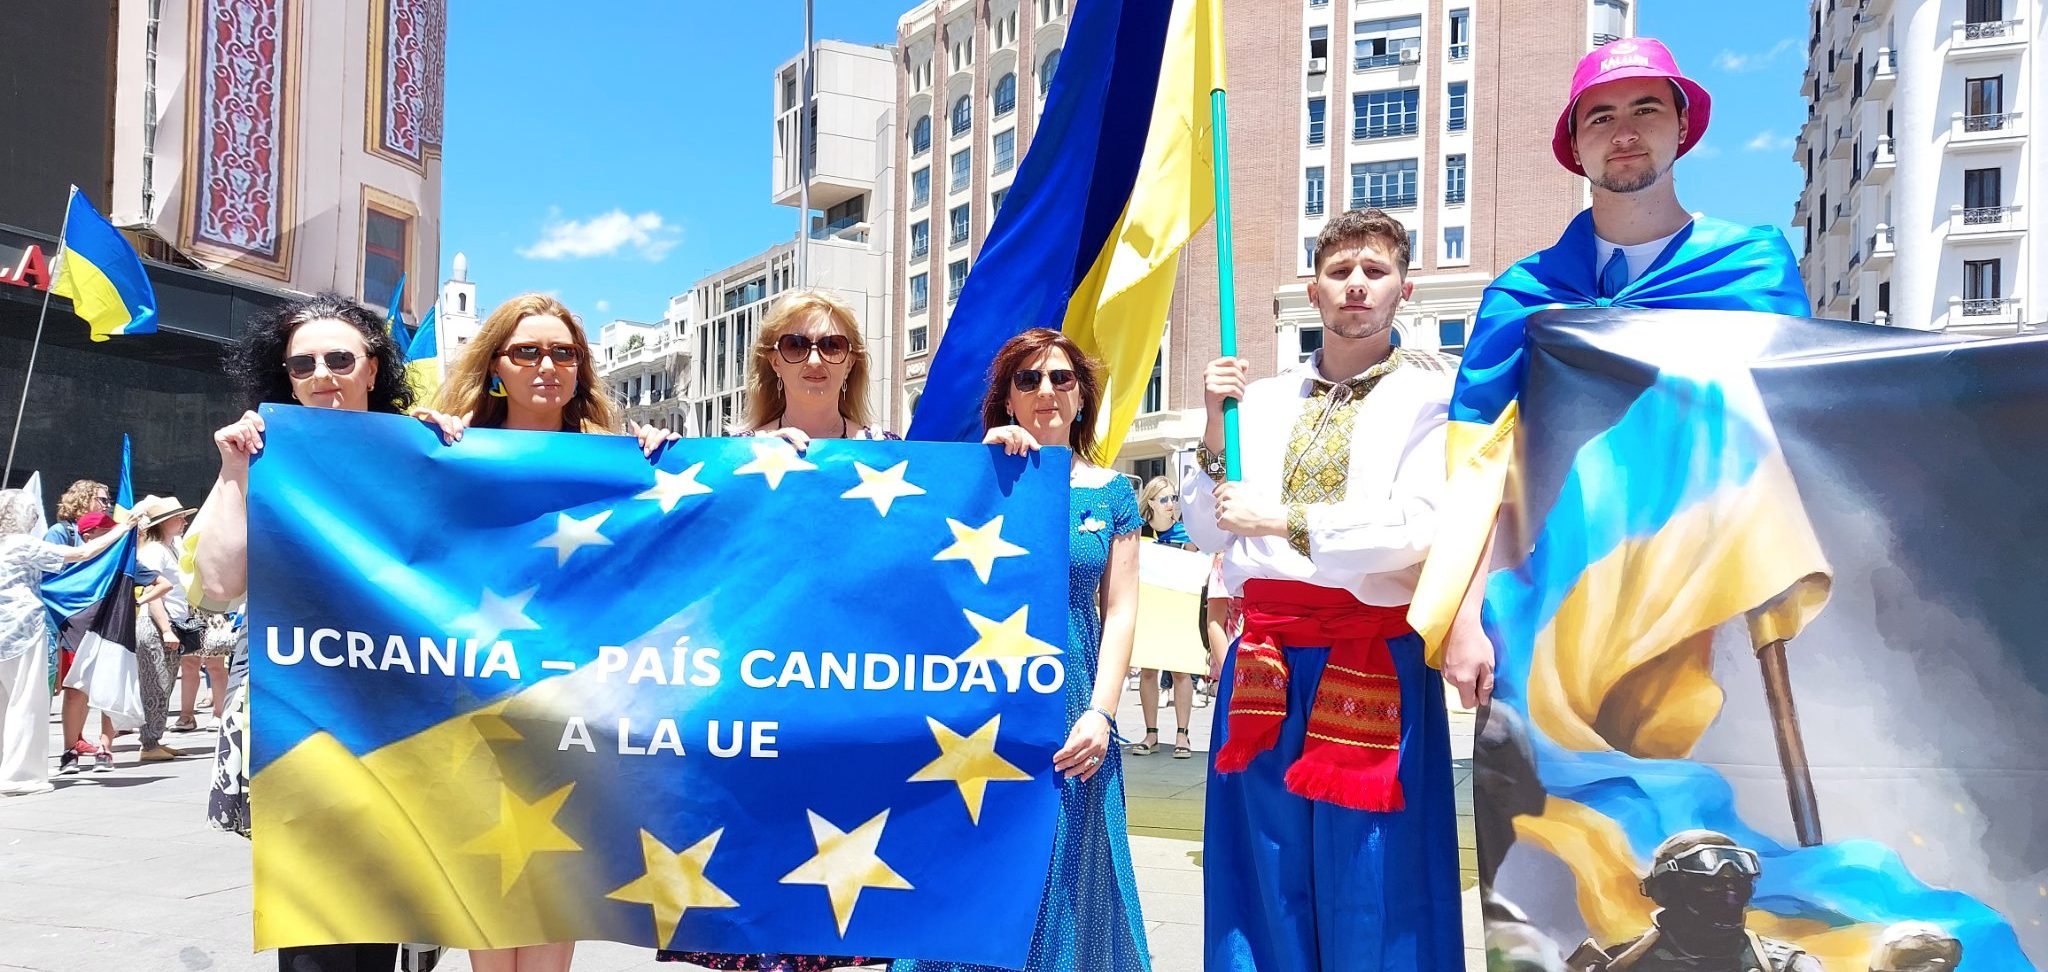 What can each of us do for the European future of Ukraine, wherever we live?